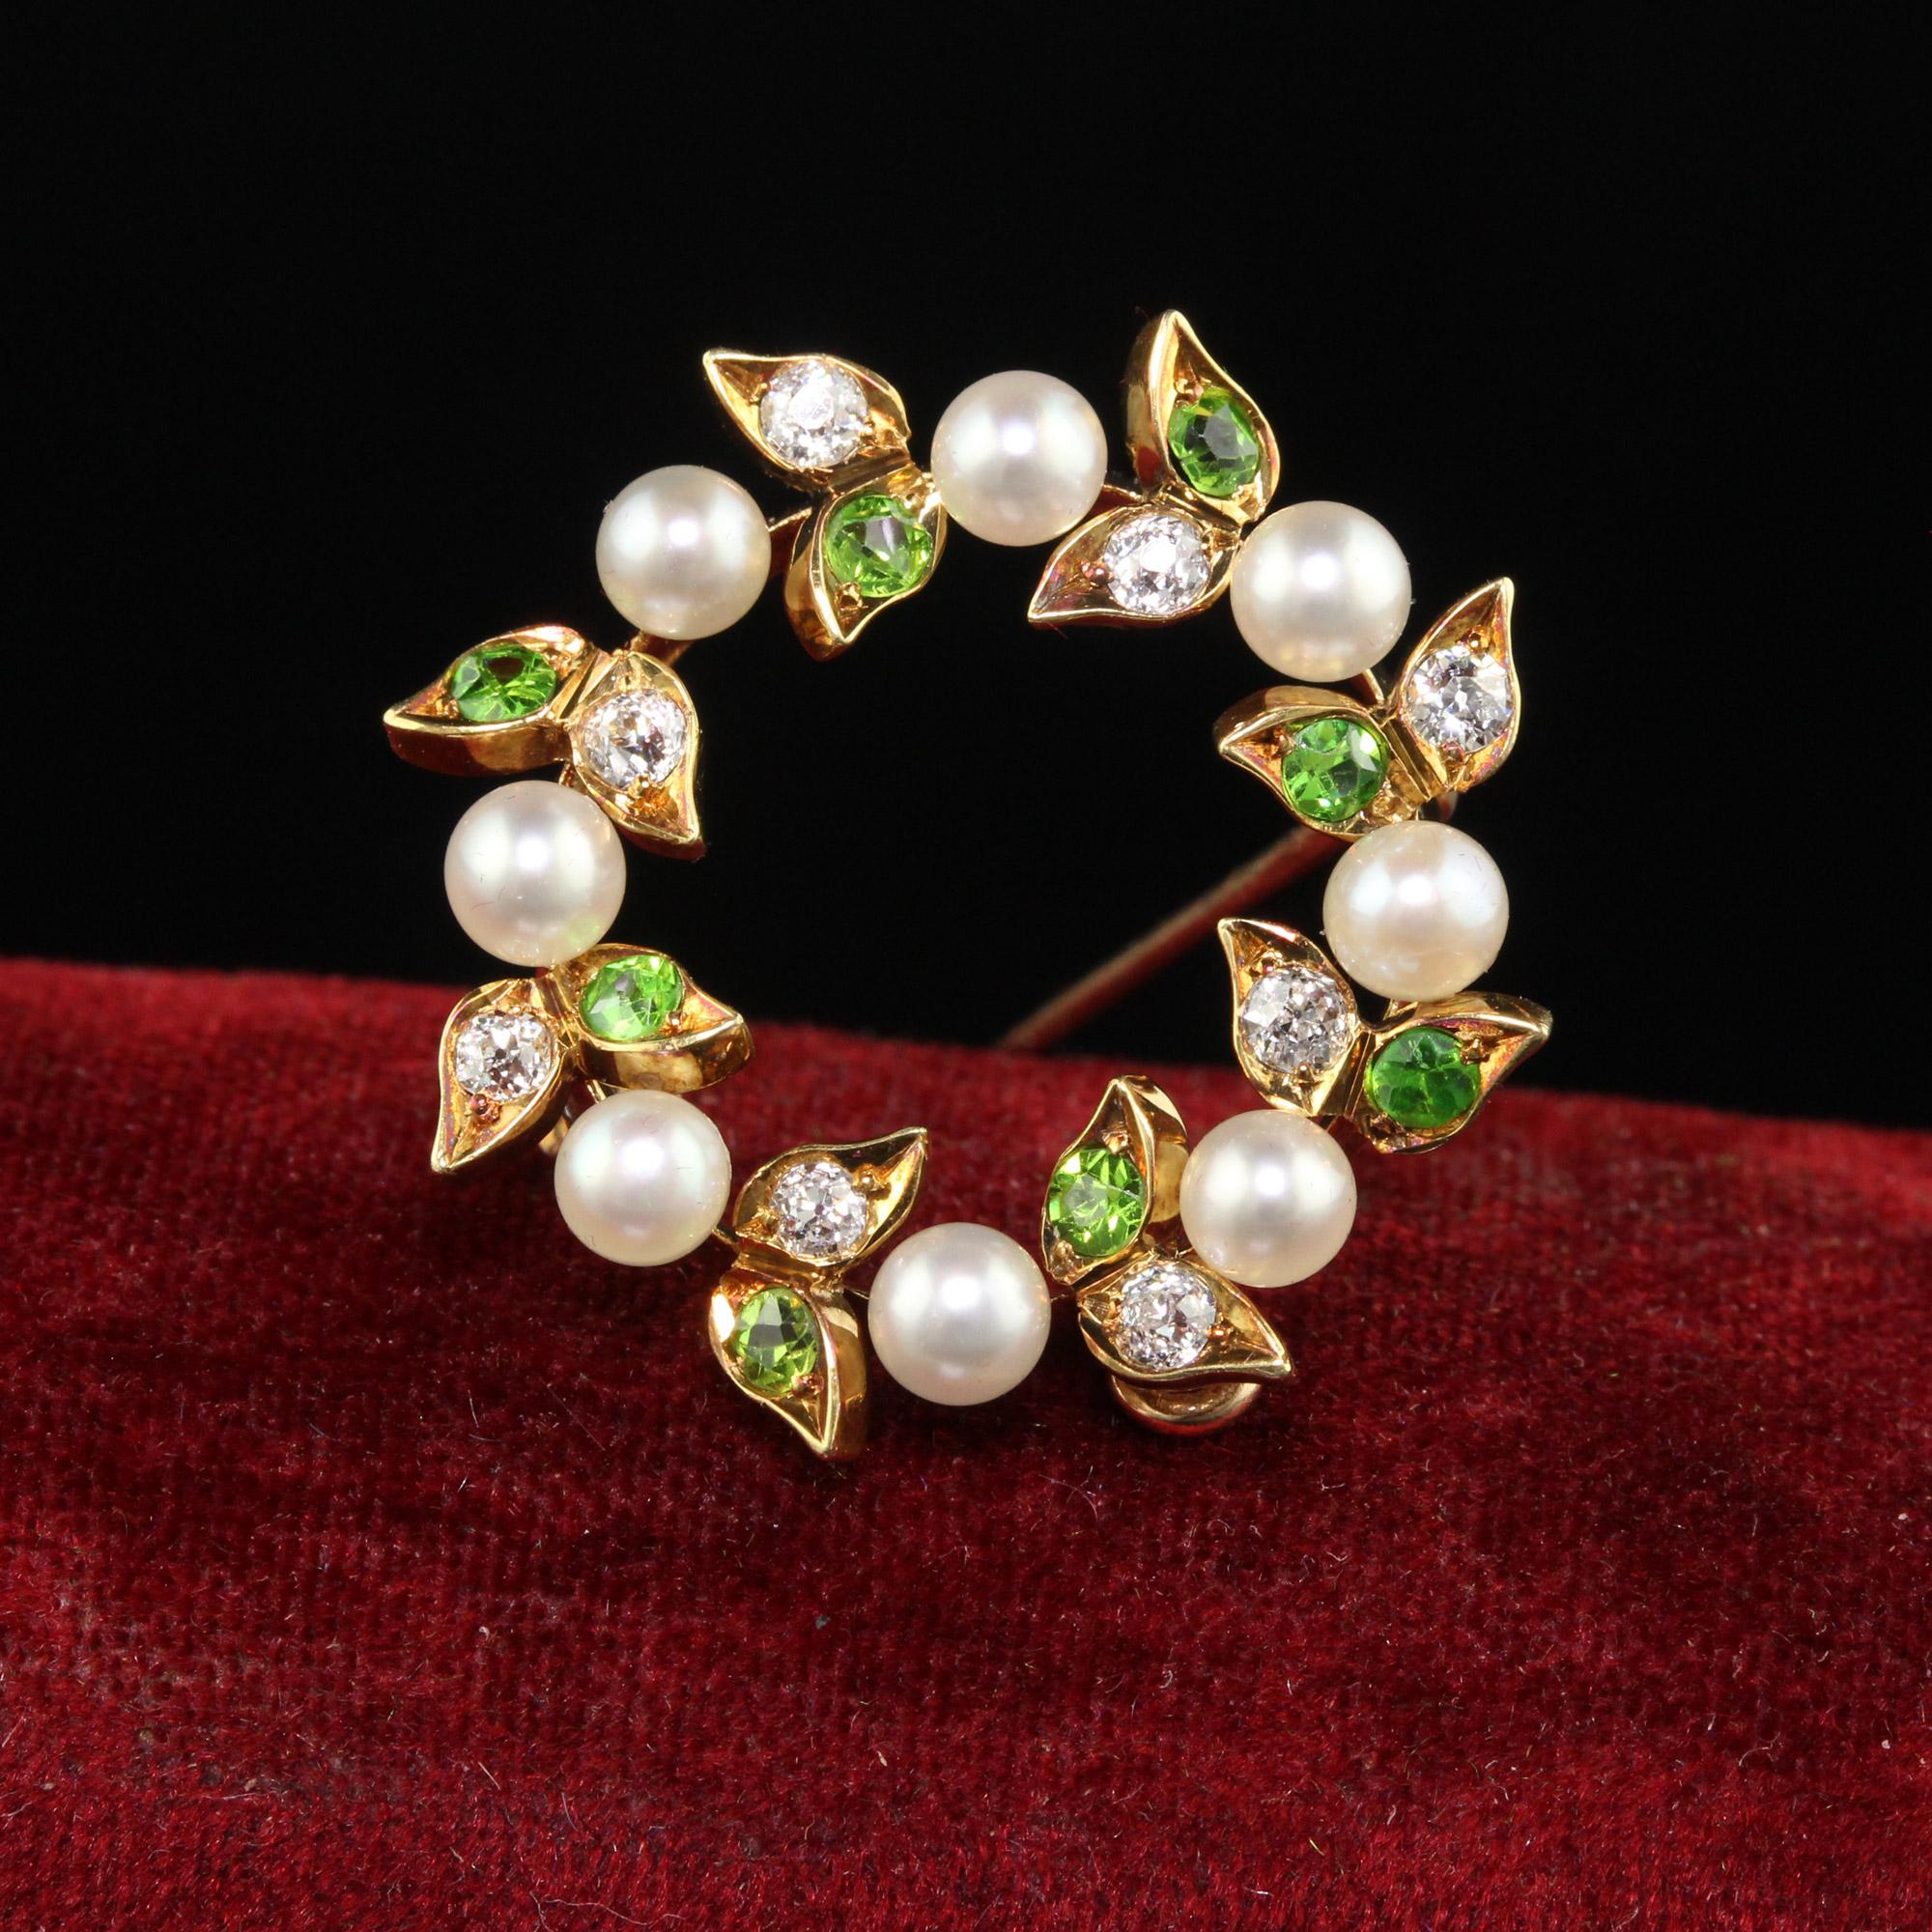 Beautiful Antique Art Nouveau 18K Yellow Gold Demantoid Garnet Diamond and Pearl Pin Pendant. This beautiful pin and pendant is crafted in 18k yellow gold. The pin has gorgeous green demantoid garnets, old mine diamonds, and pearls set in a wreath